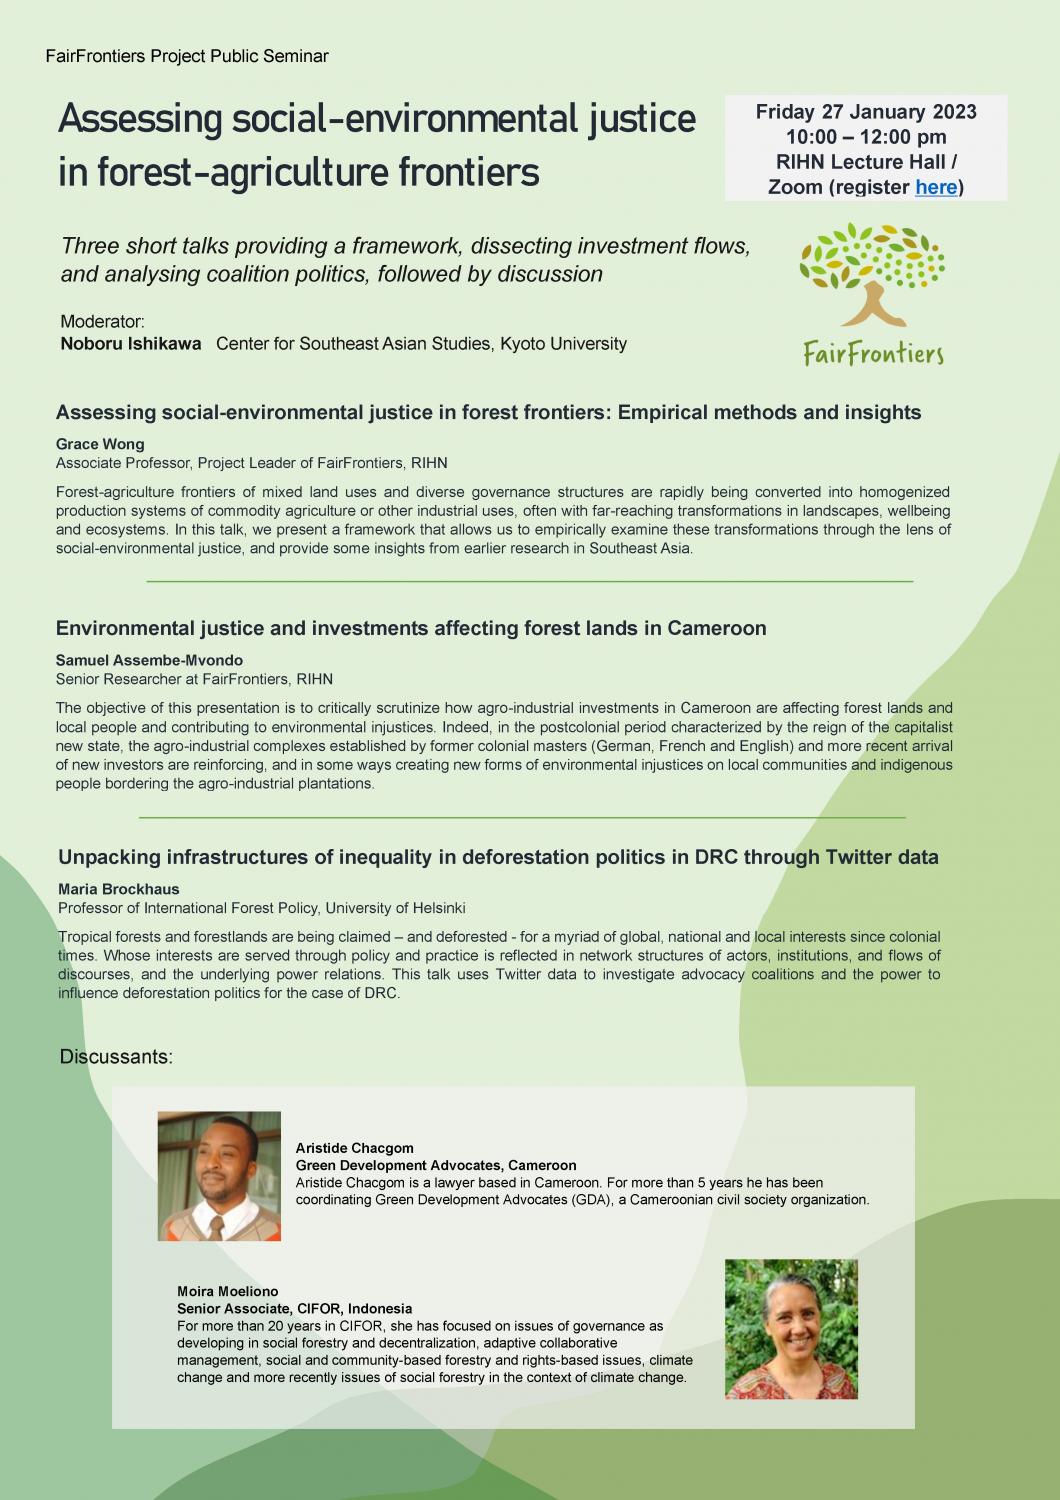 FairFrontiers Project Public Seminar Assessing Social-Environmental Justice in Forest-Agriculture Frontiers